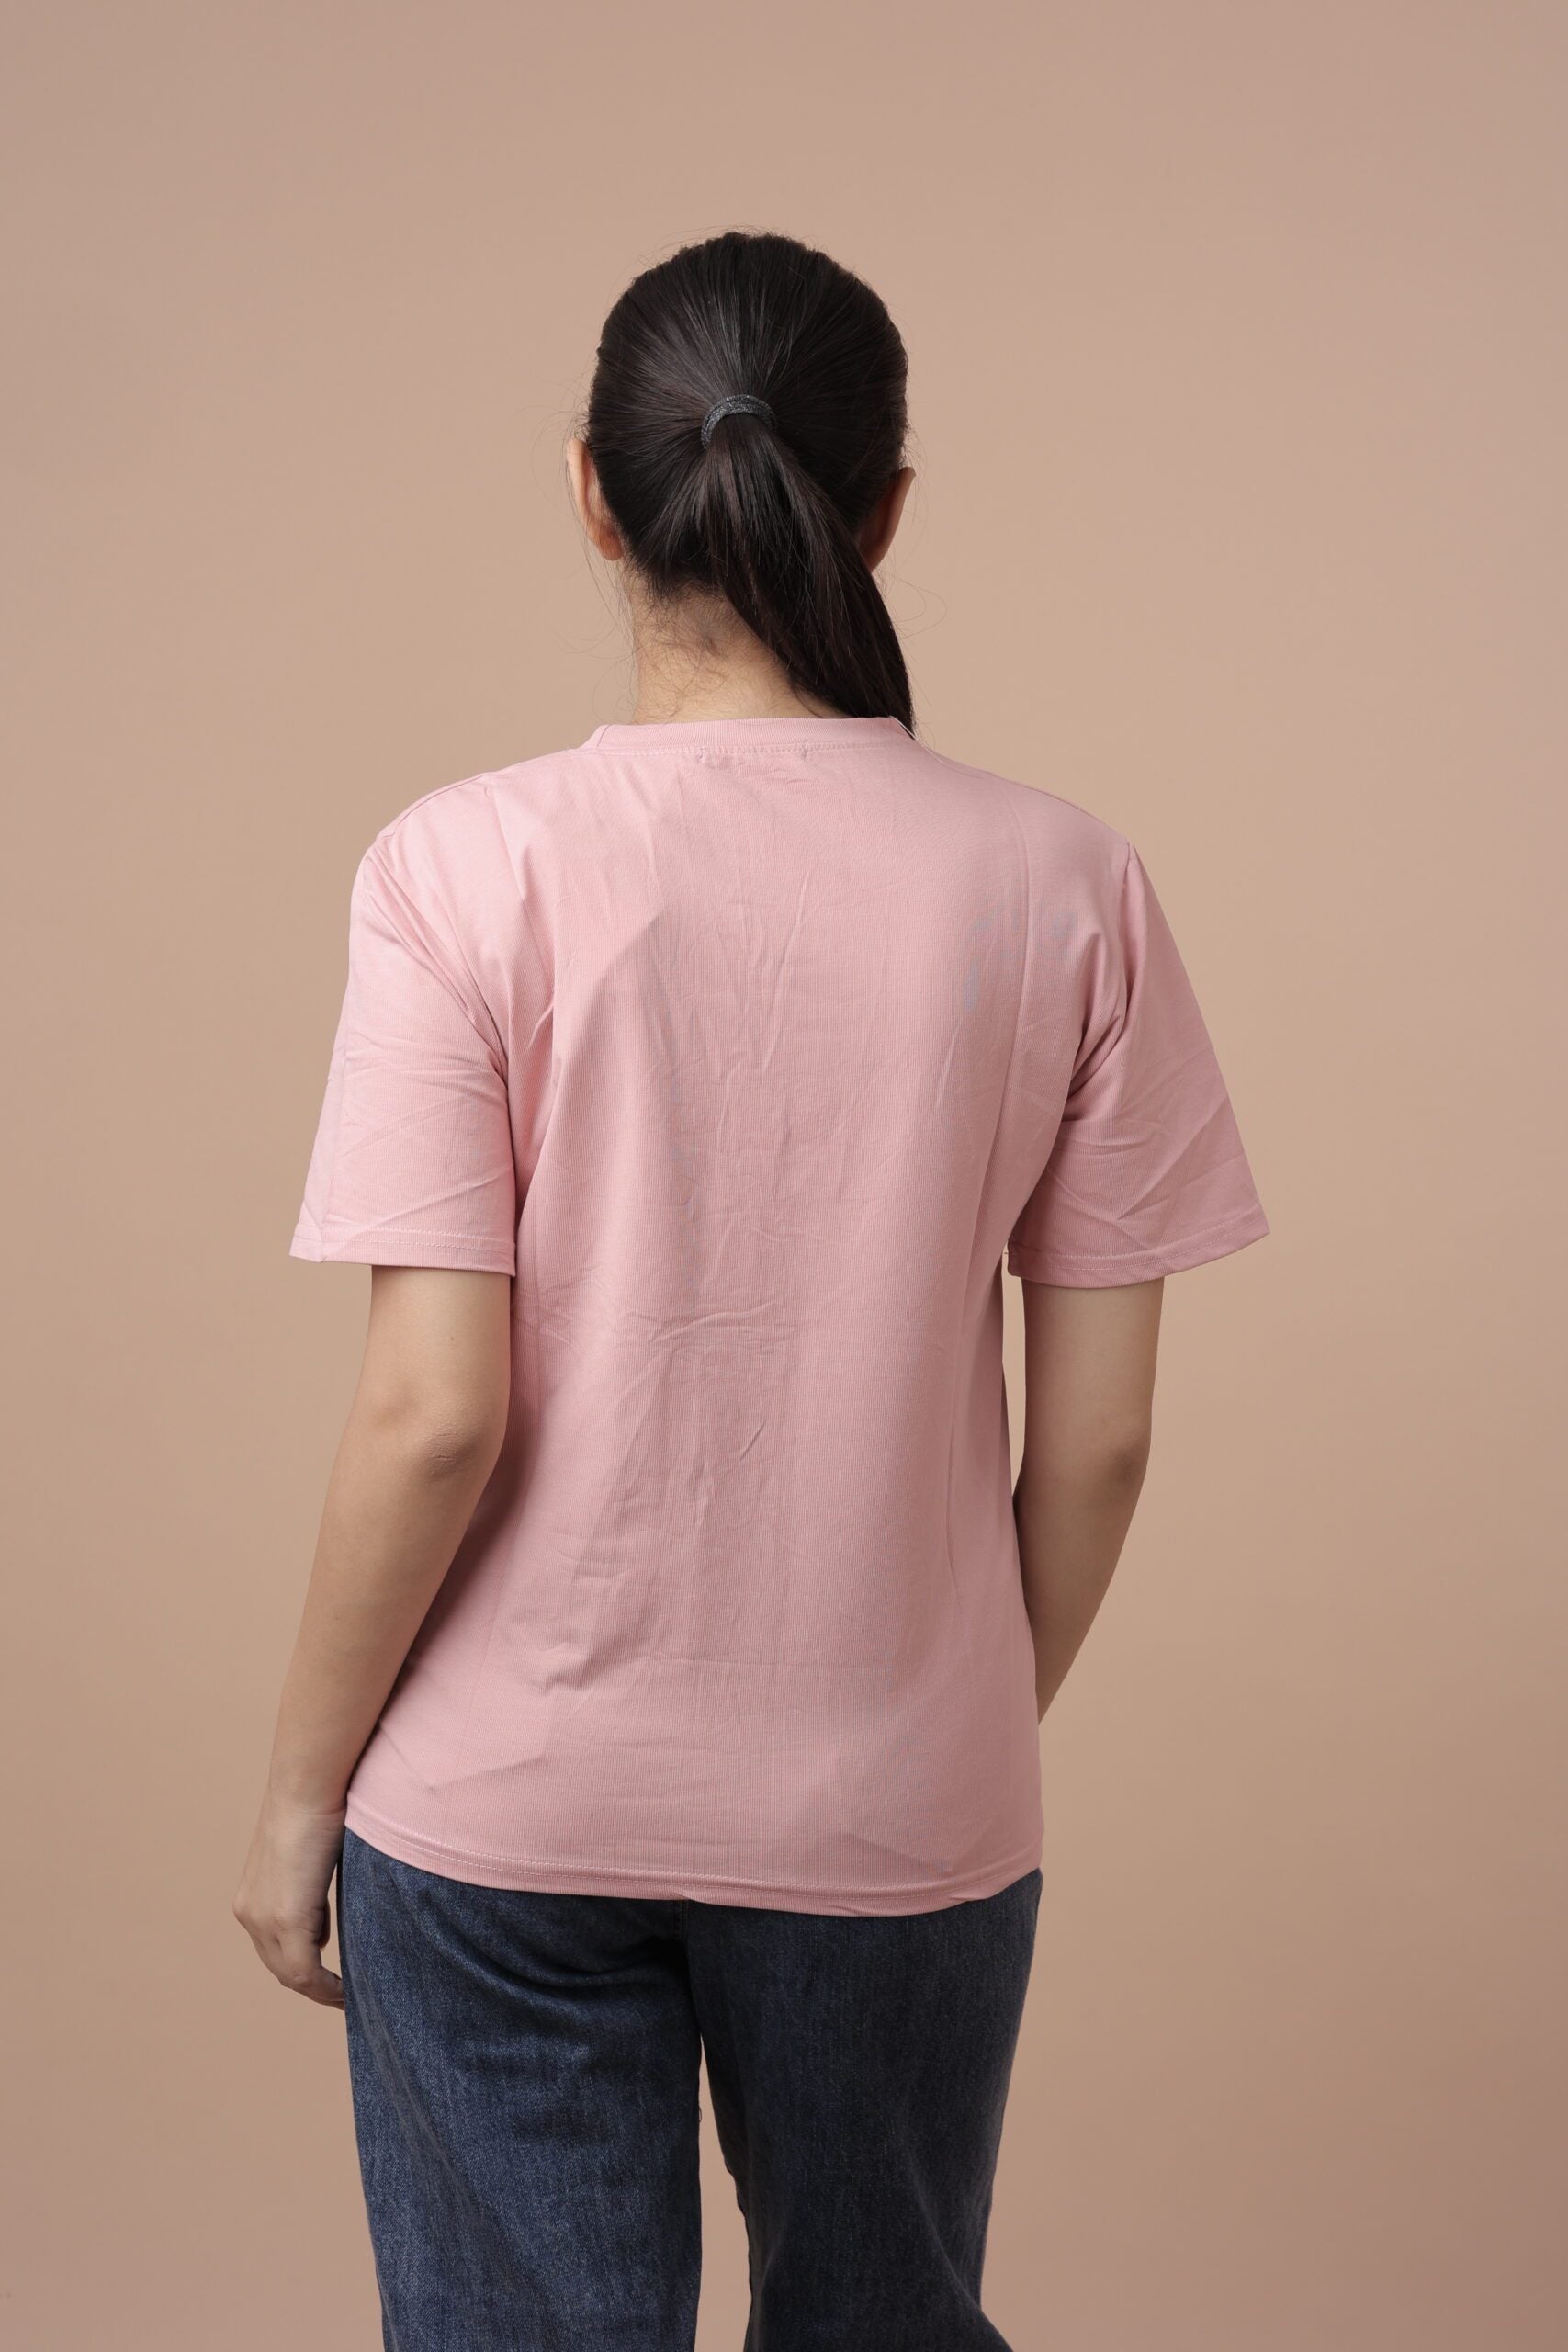 Here Tshirt (Pink) Add a Touch of Playful Elegance to Your Wardrobe!